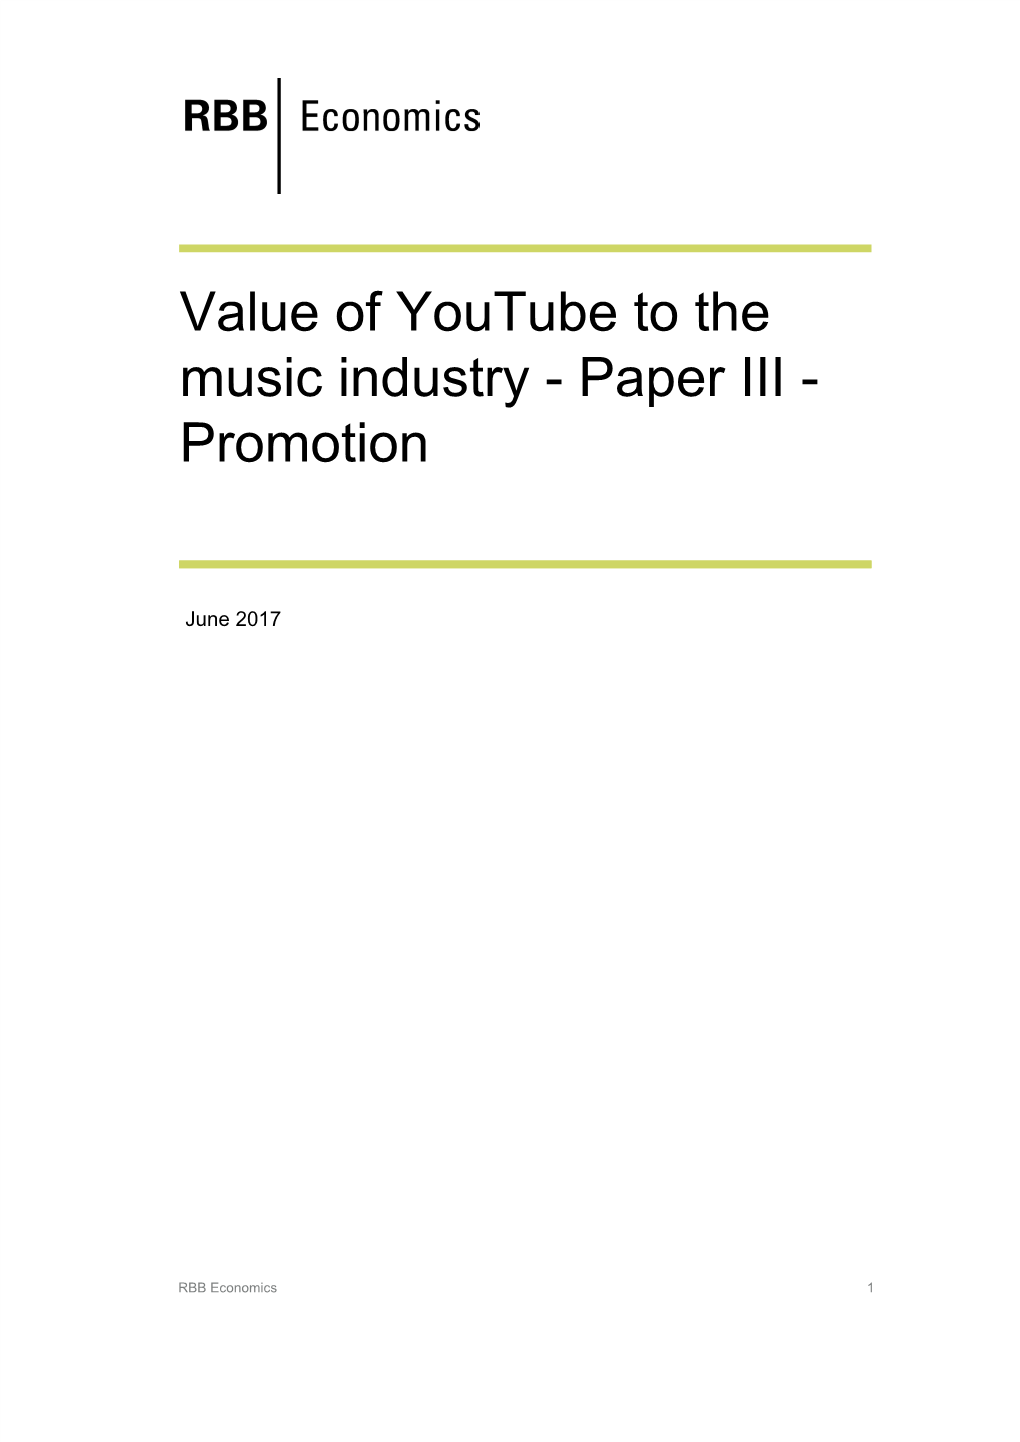 Value of Youtube to the Music Industry - Paper III - Promotion